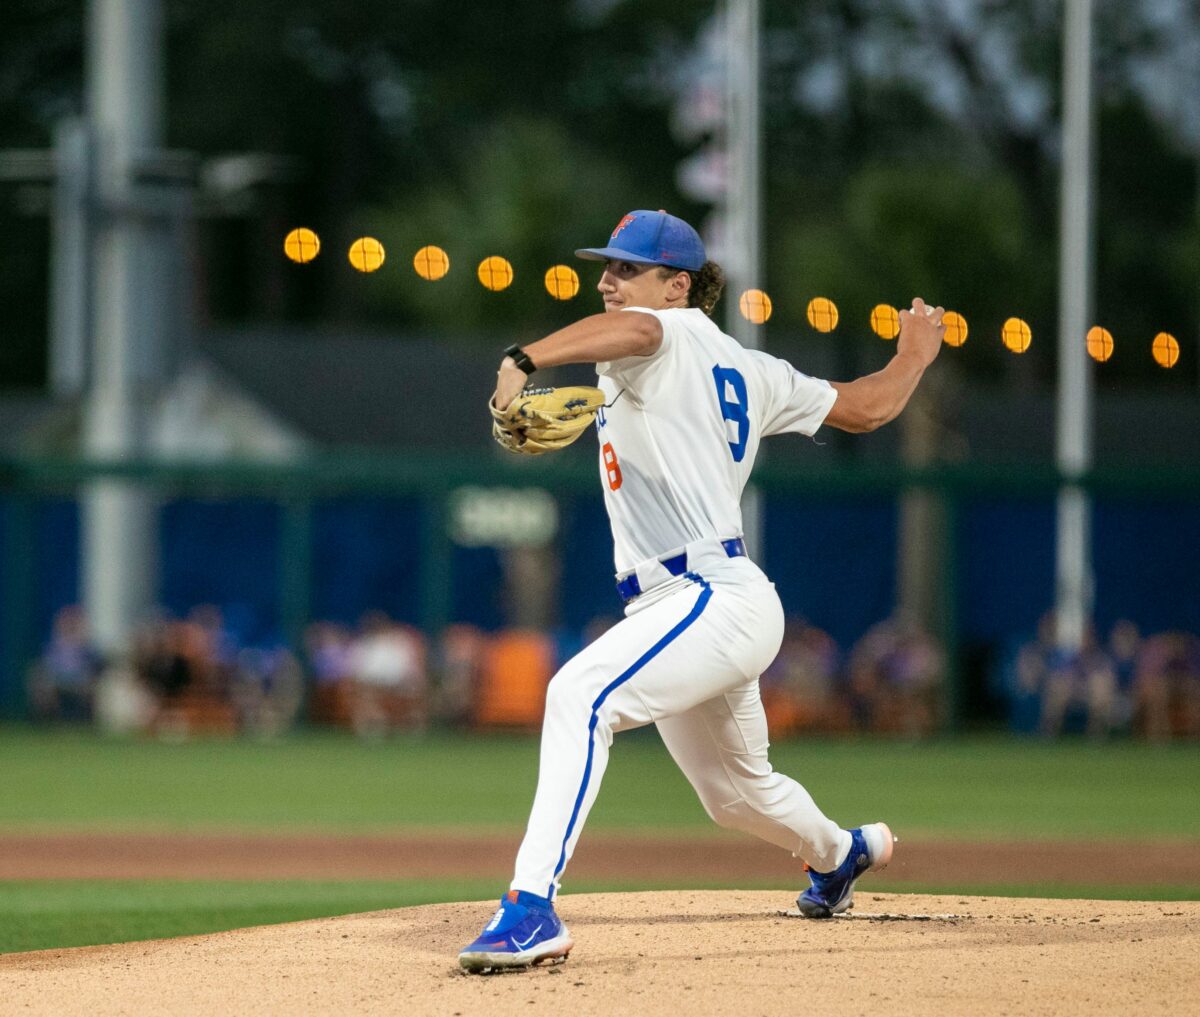 Series Preview: Florida set to host Siena for weekend series